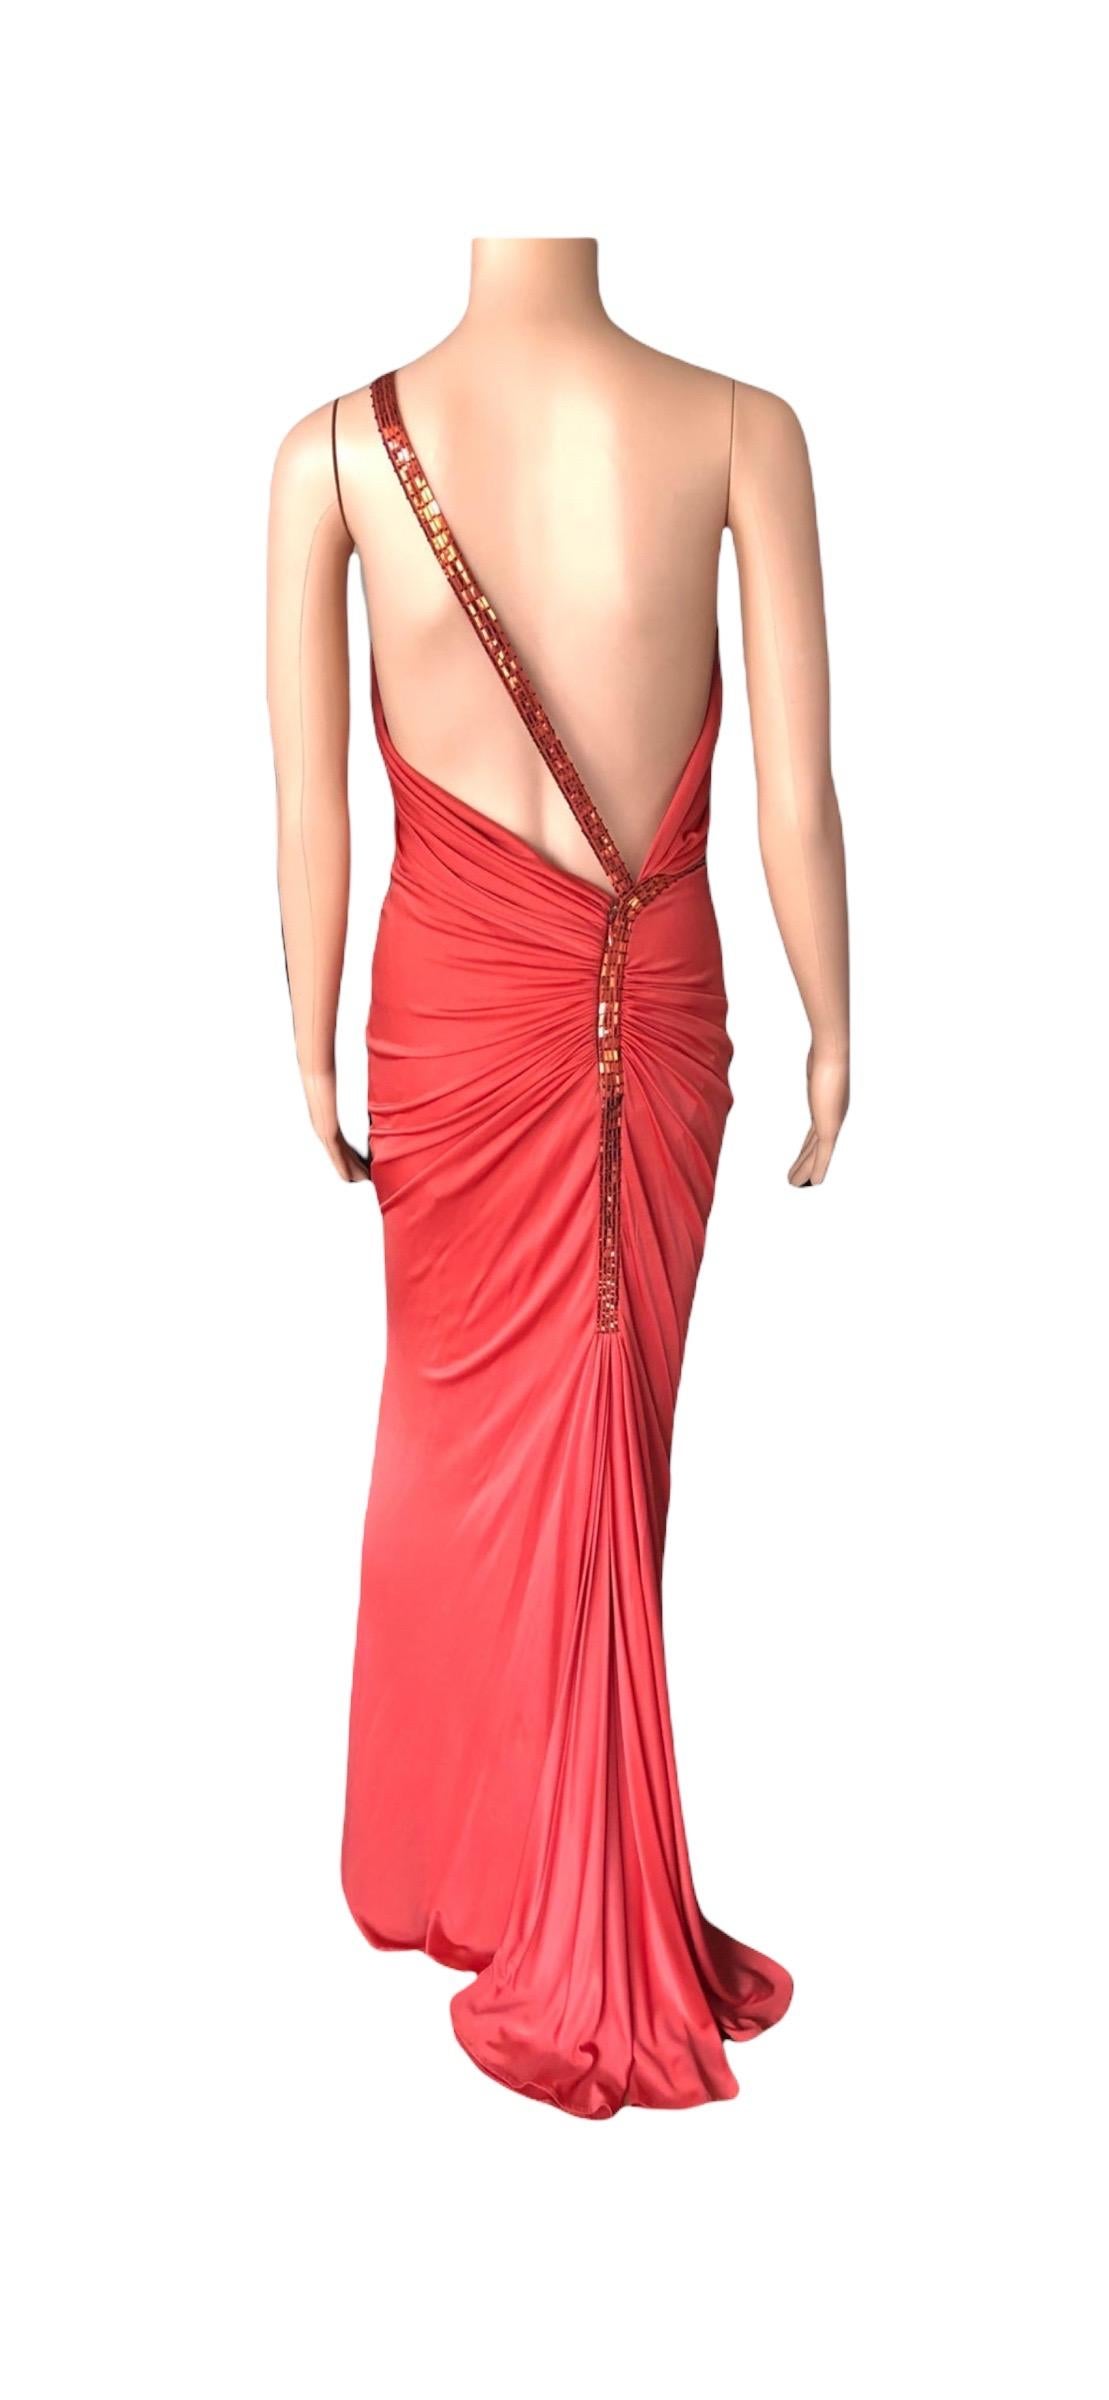 Gianni Versace S/S 2001 Runway Embellished Backless Evening Dress Gown For Sale 10